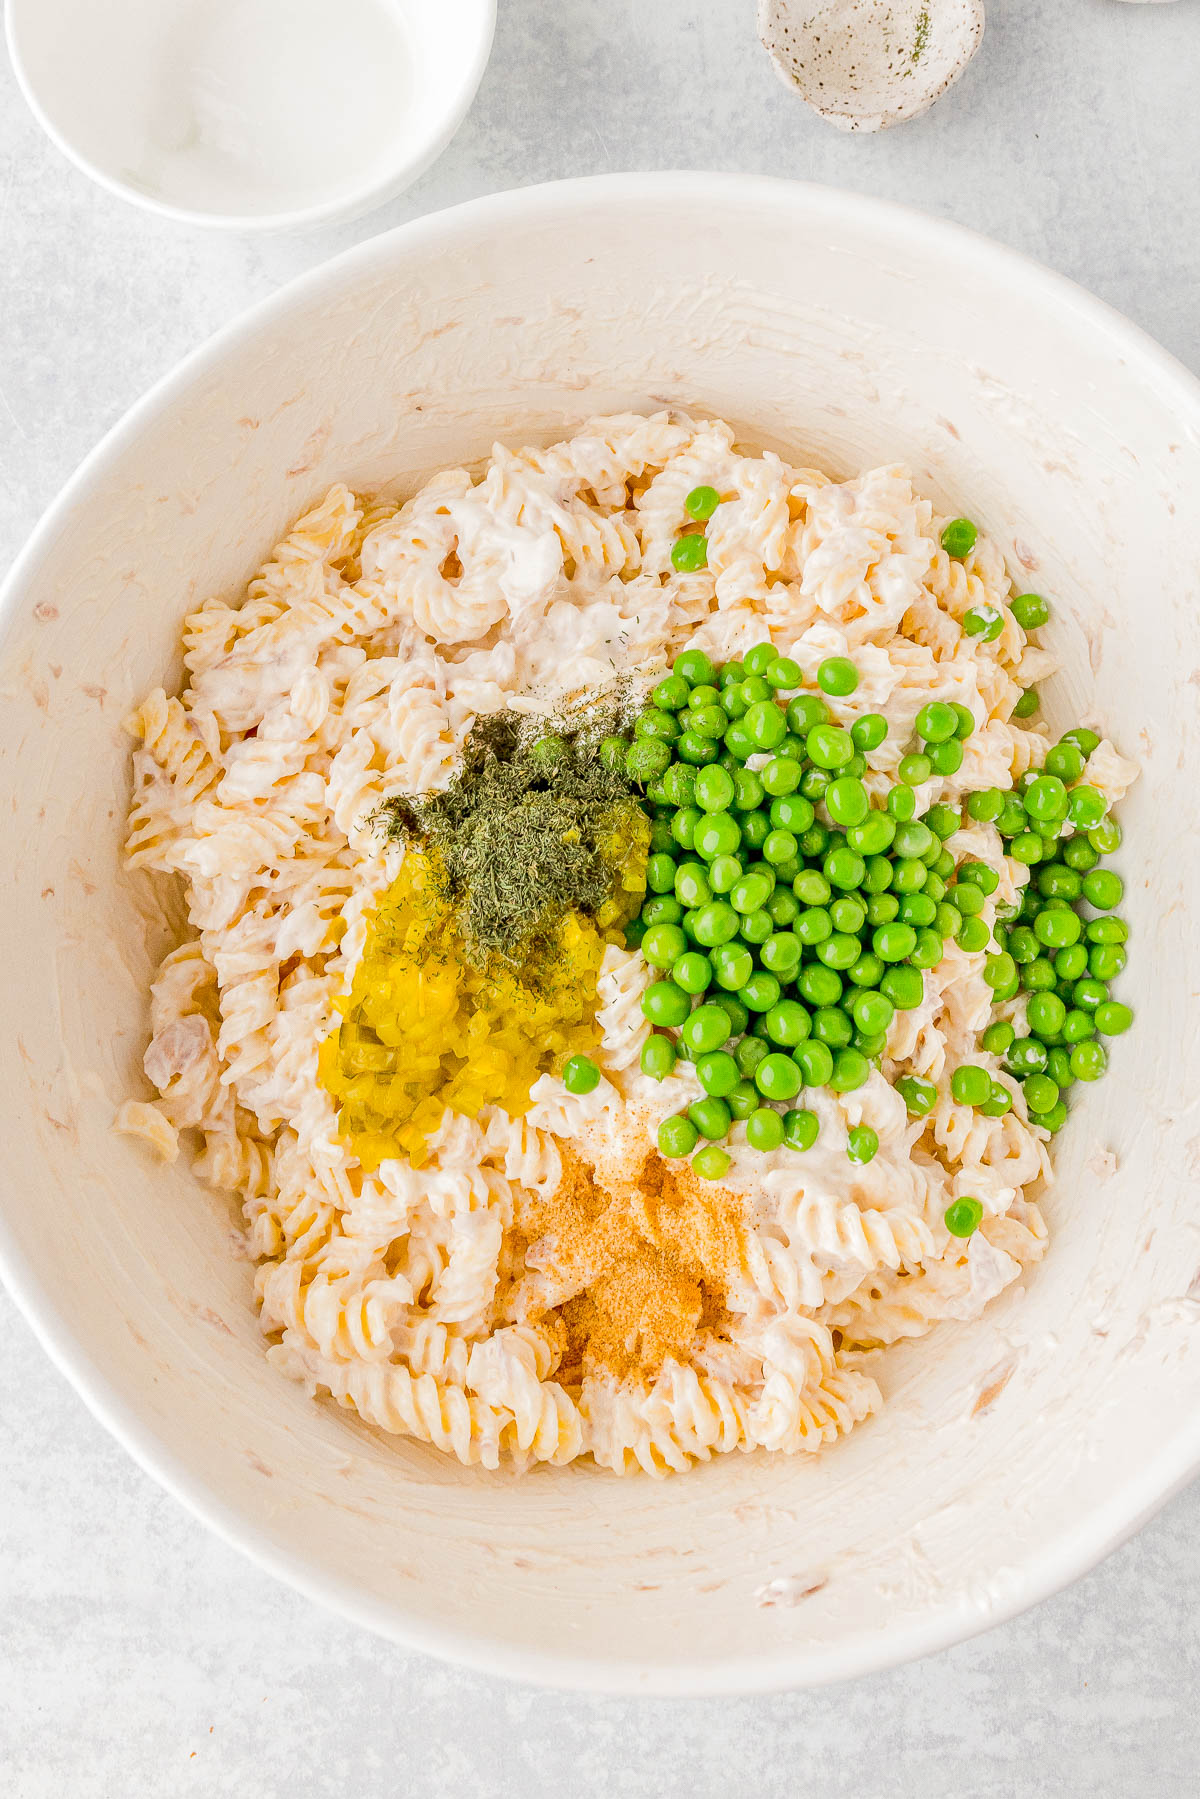 A bowl of cooked spiral pasta mixed with peas, seasonings, and a creamy dressing, placed on a white surface.